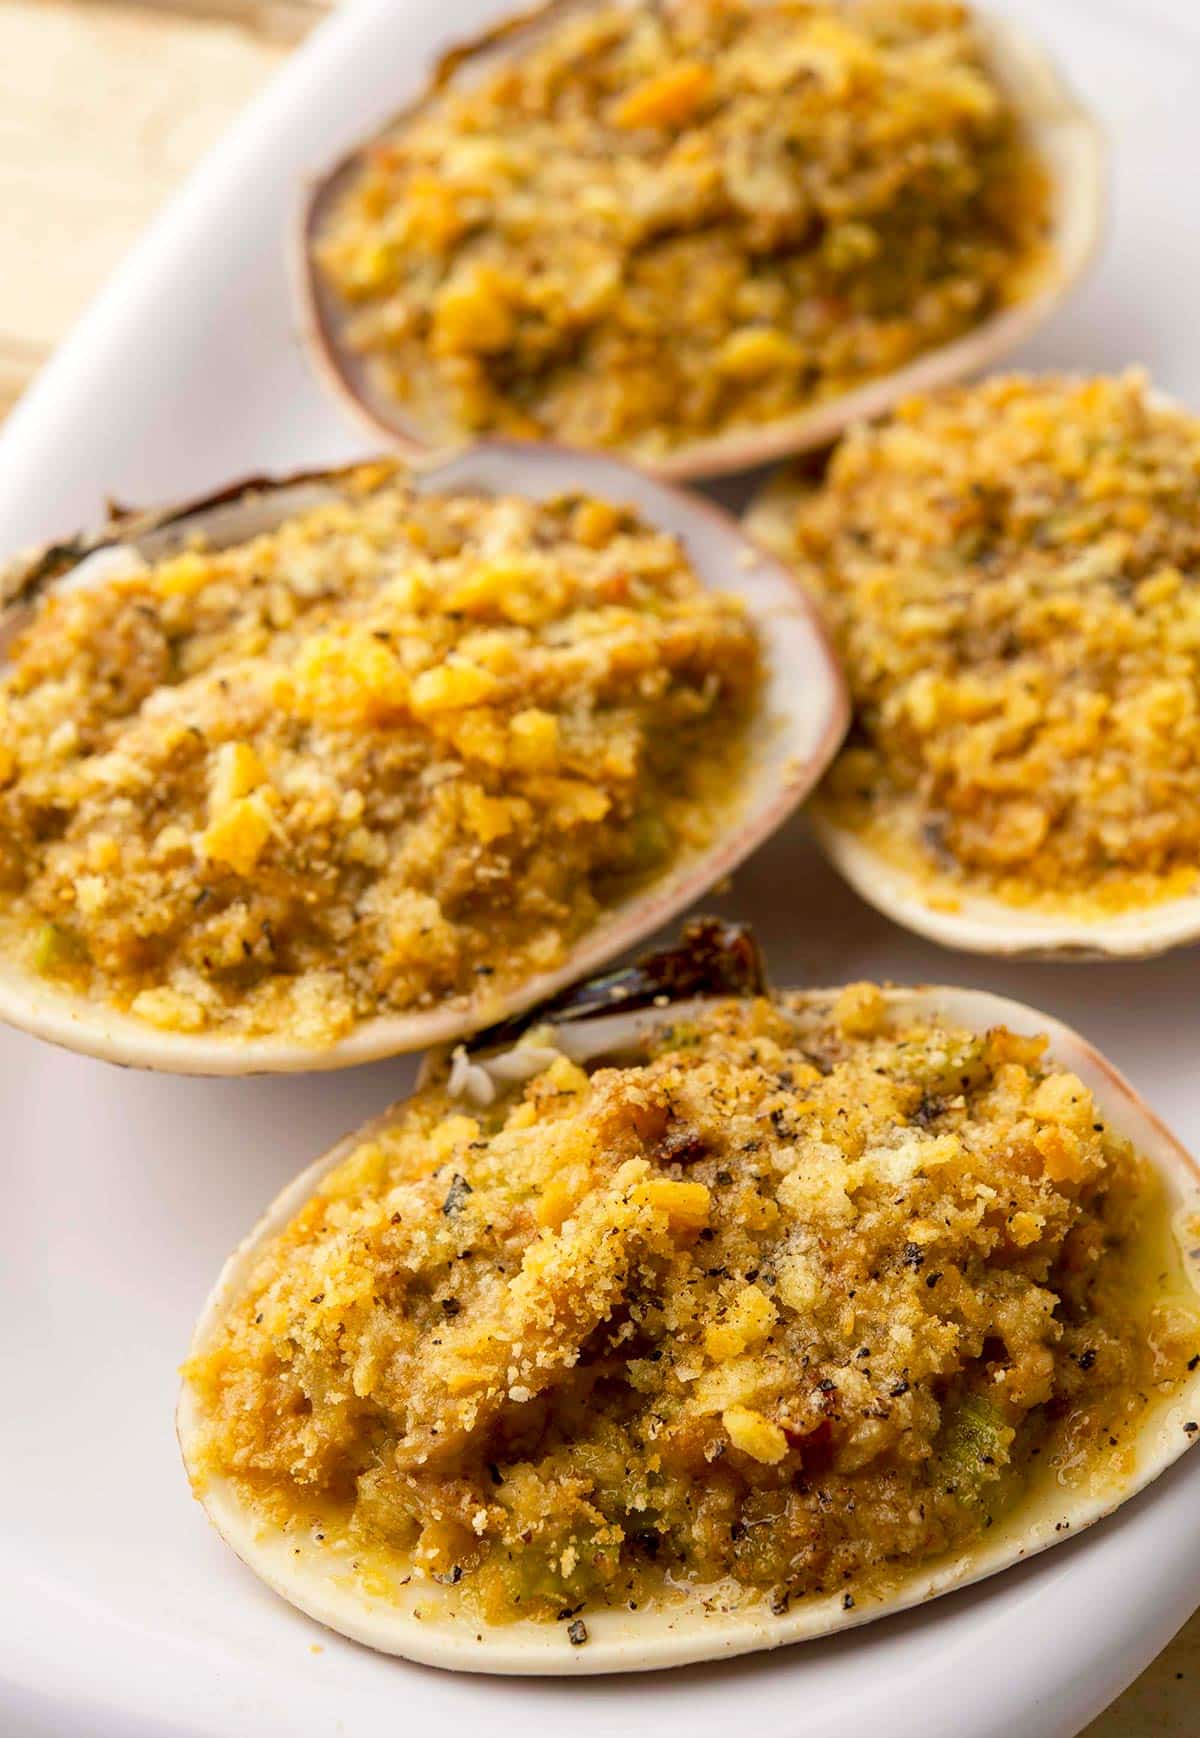 Baked Clams, Appetizers